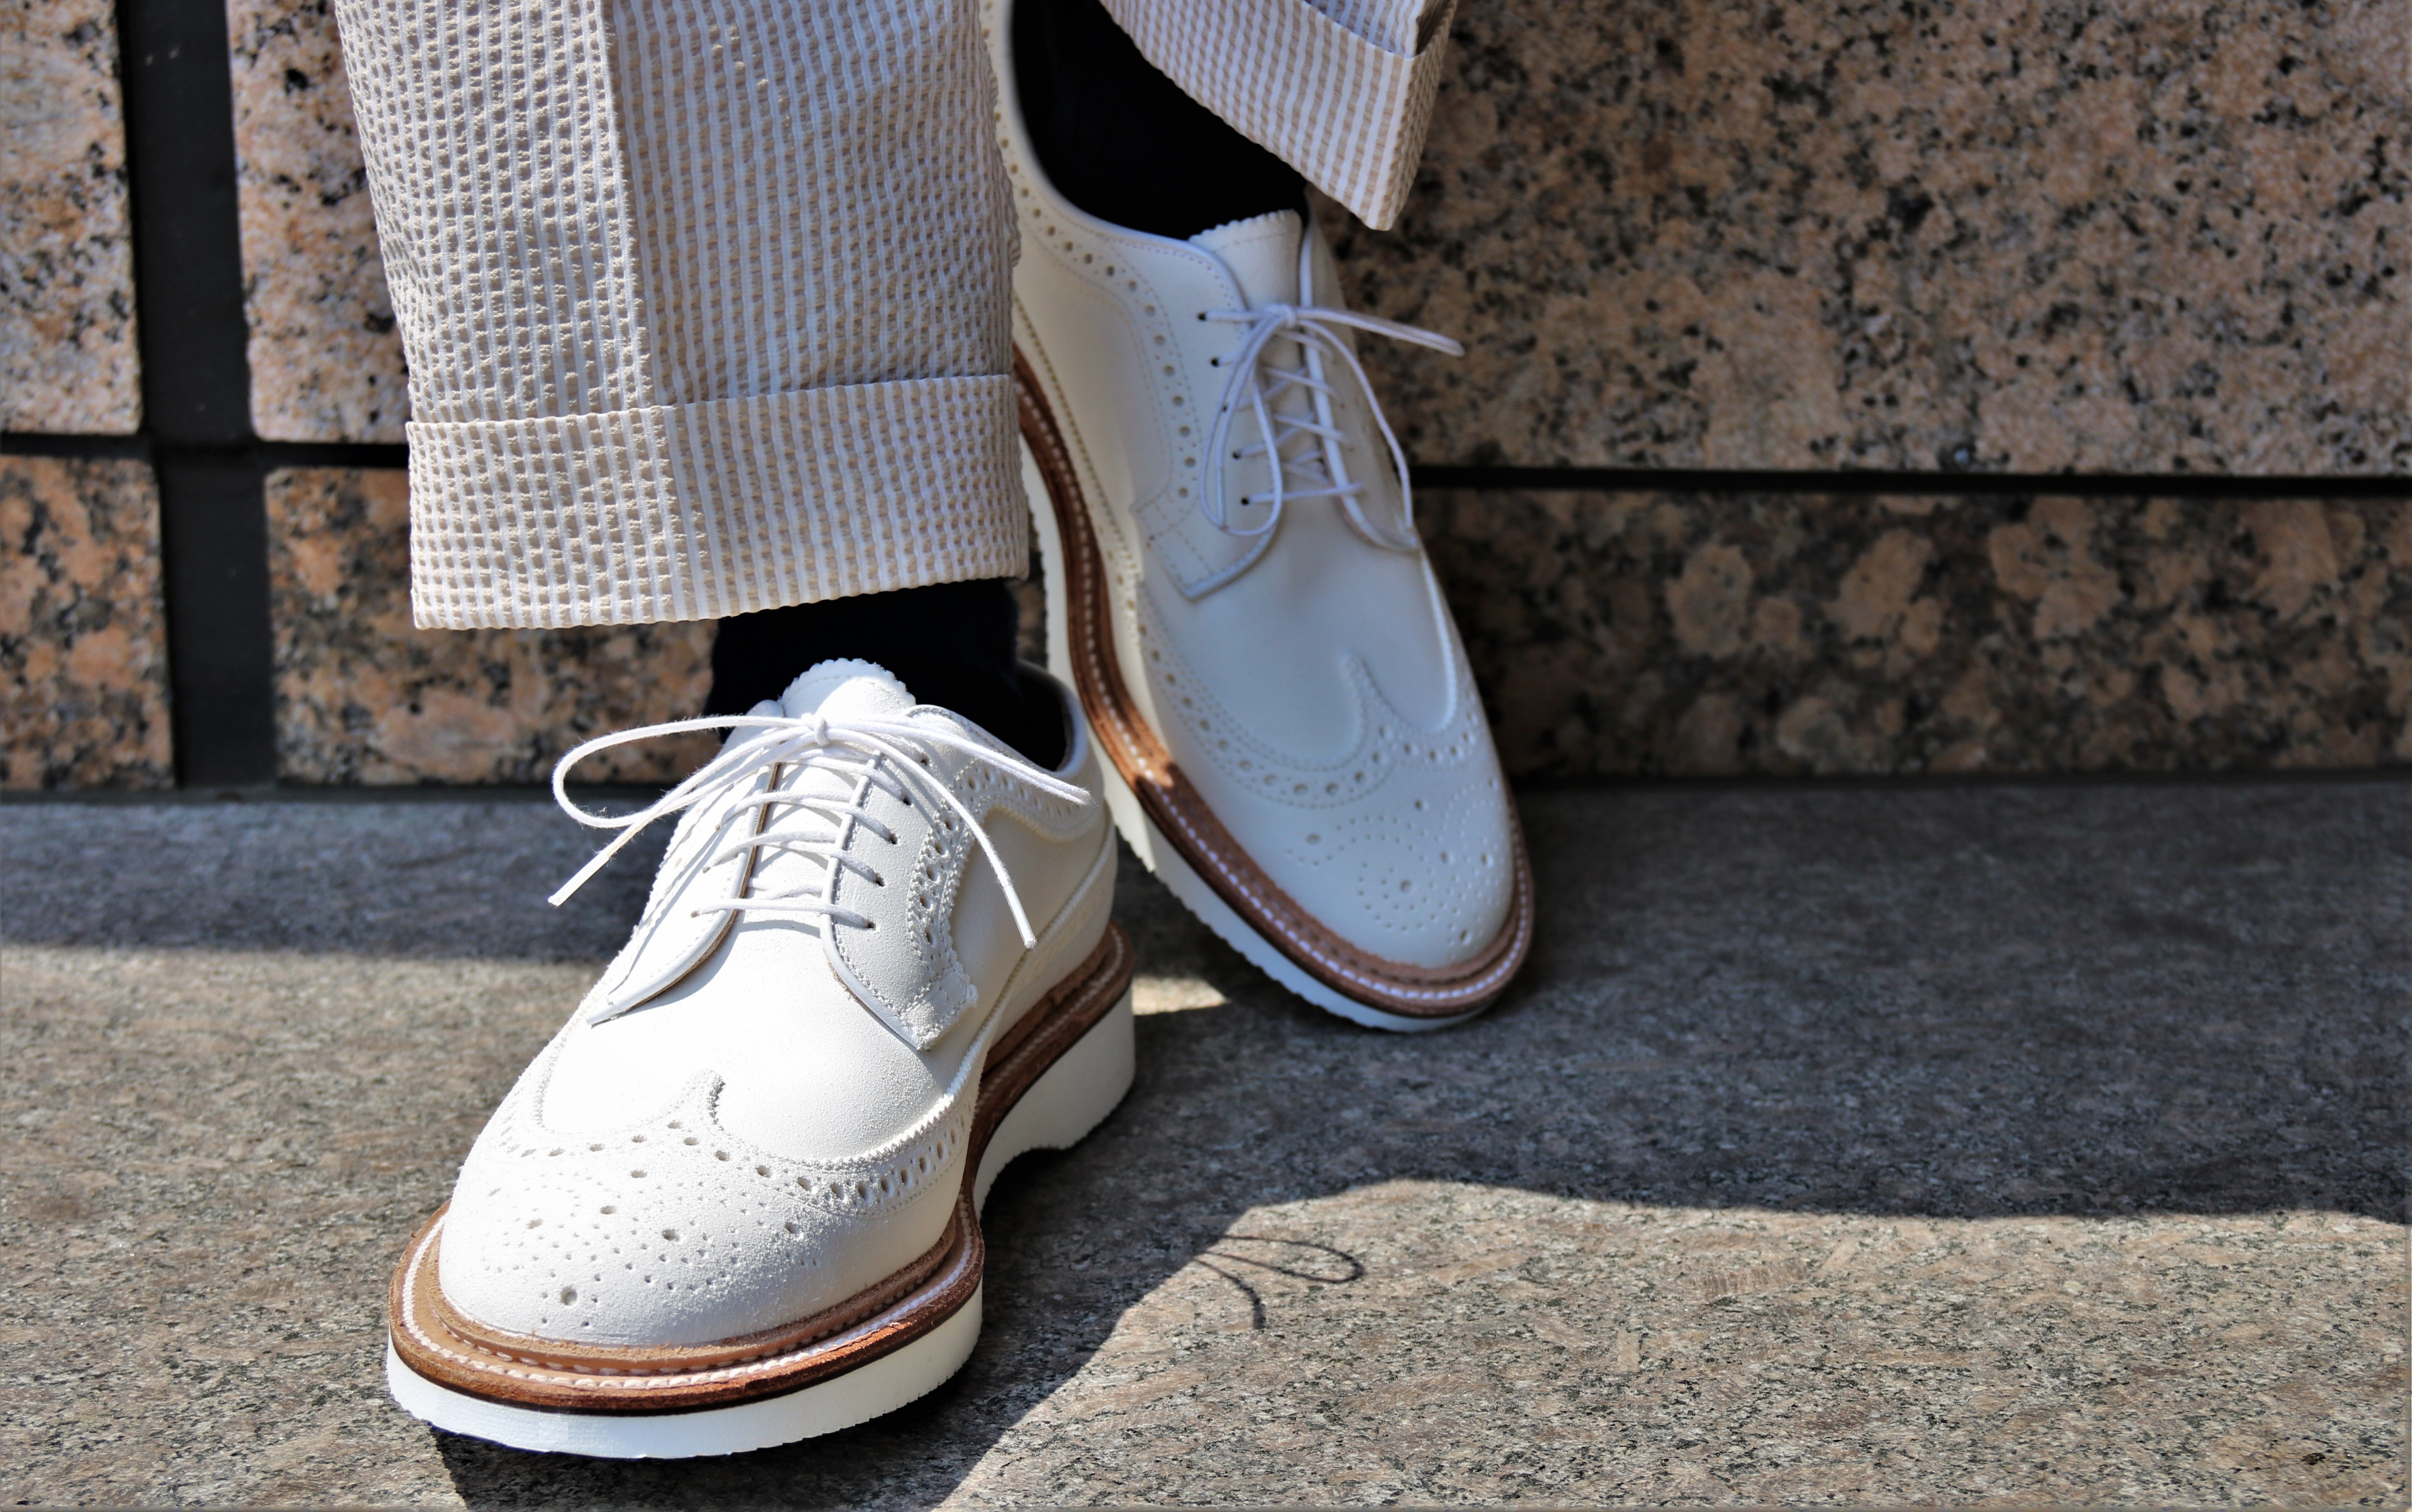 ALDEN N6515 WHITE SUEDE LONG WING TIP | JOURNAL | THE LAKOTA HOUSE